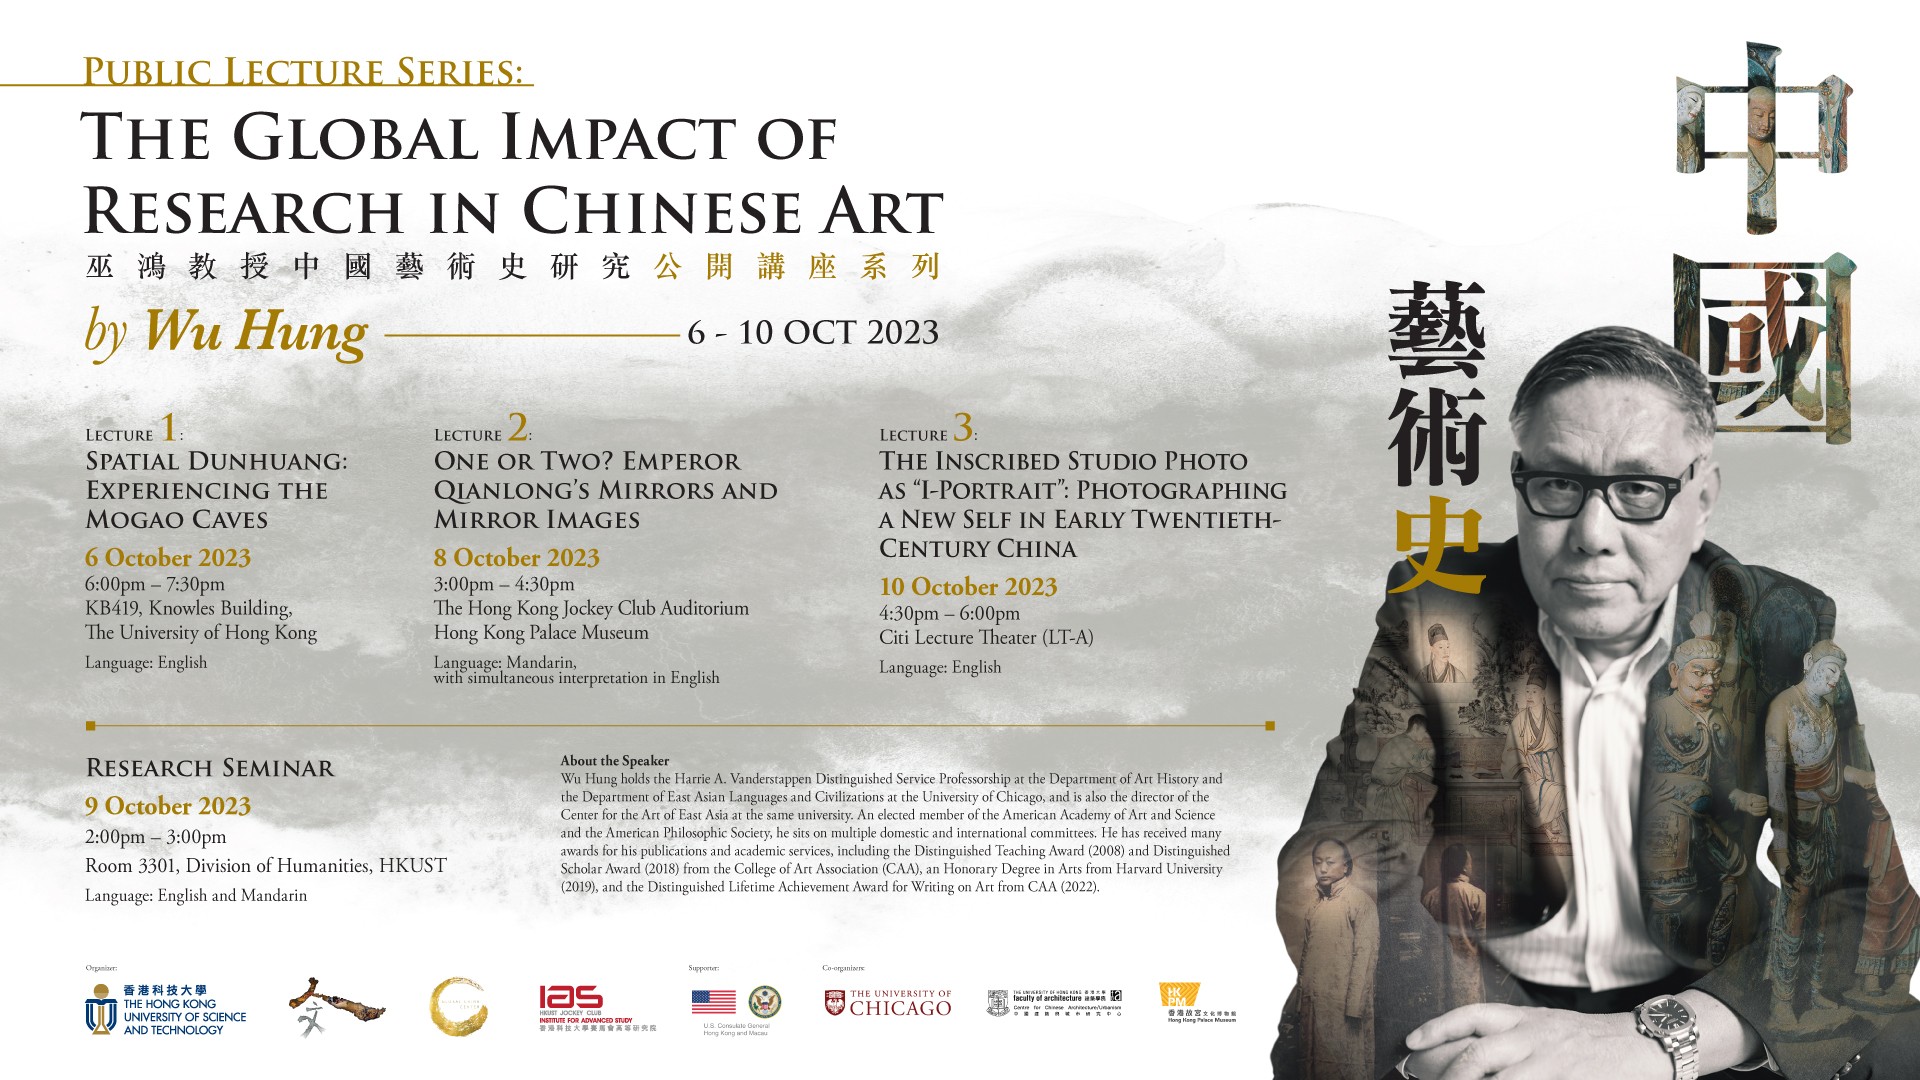 The Global Impact of Research in Chinese Art by Wu Hung - Lecture